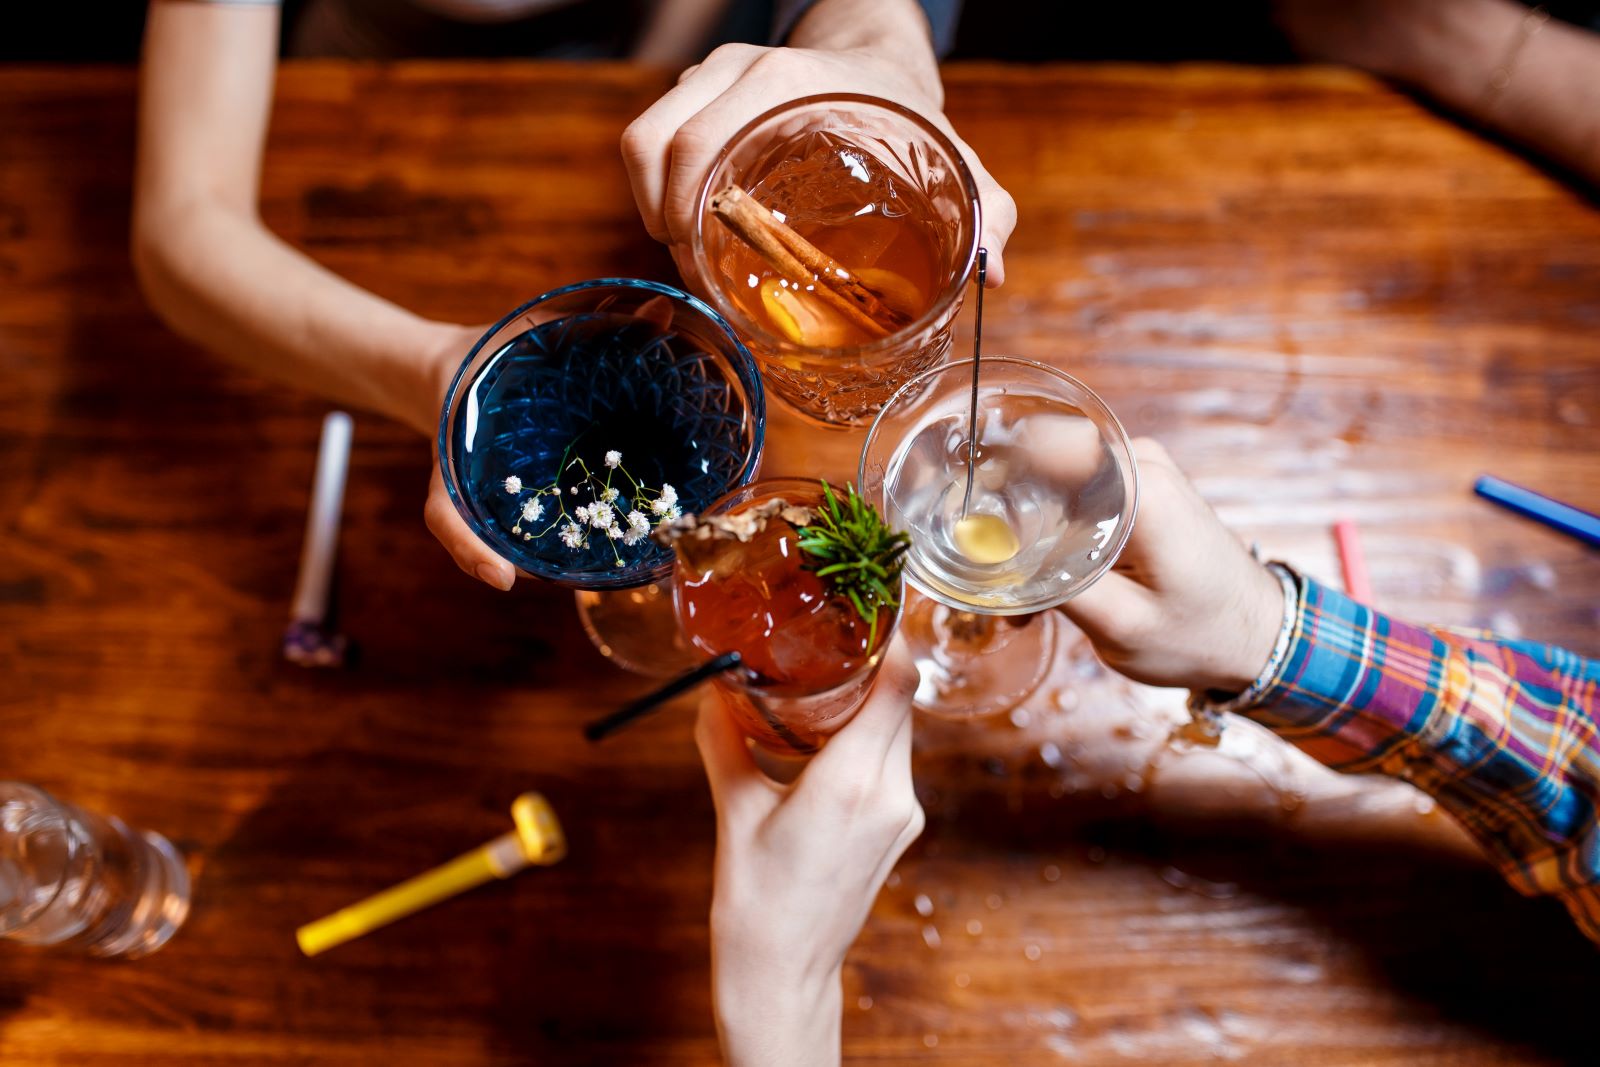 Is Moderate Drinking Actually Good for My Health?